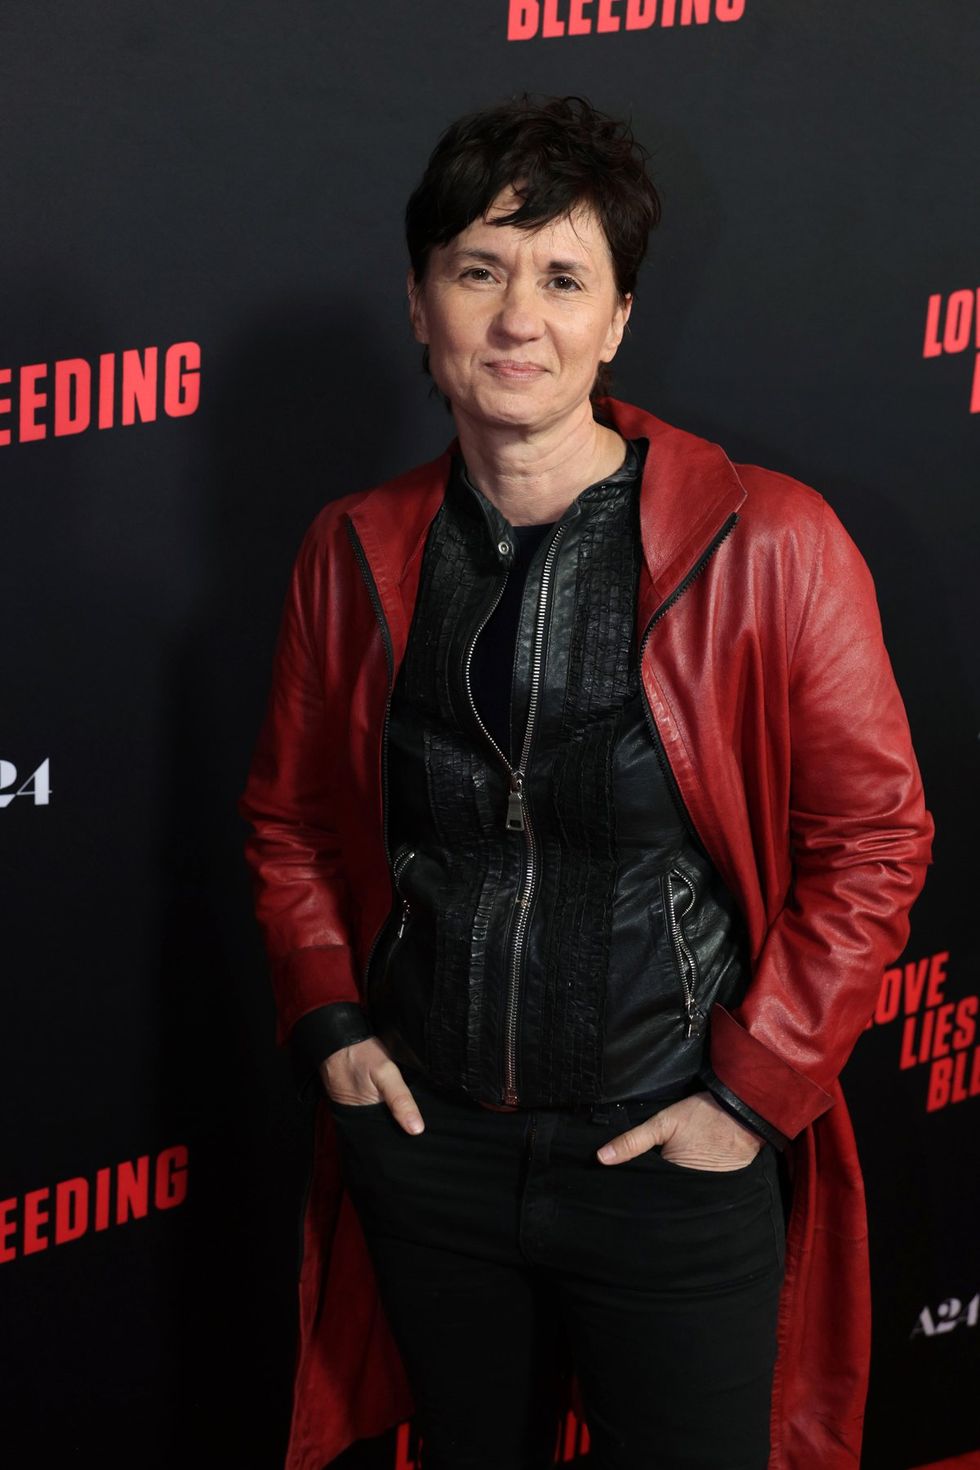 Photo Gallery Love Lies Bleeding Premiers Red Carpet Party Tracy Gilchrest panel